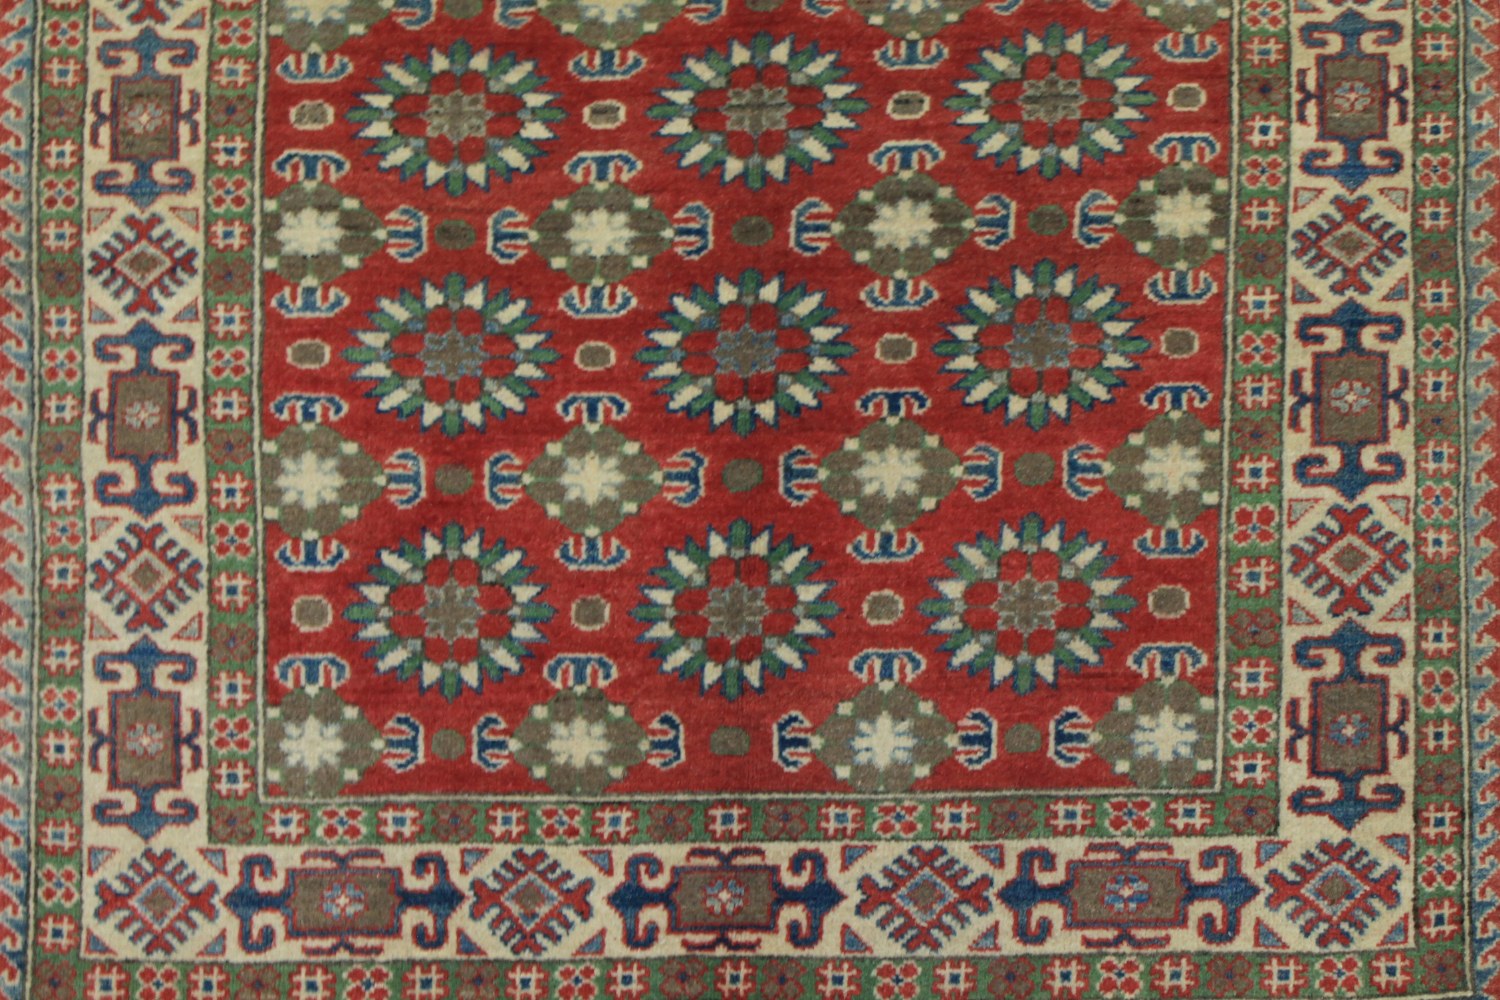 4x6 Kazak Hand Knotted Wool Area Rug - MR024529